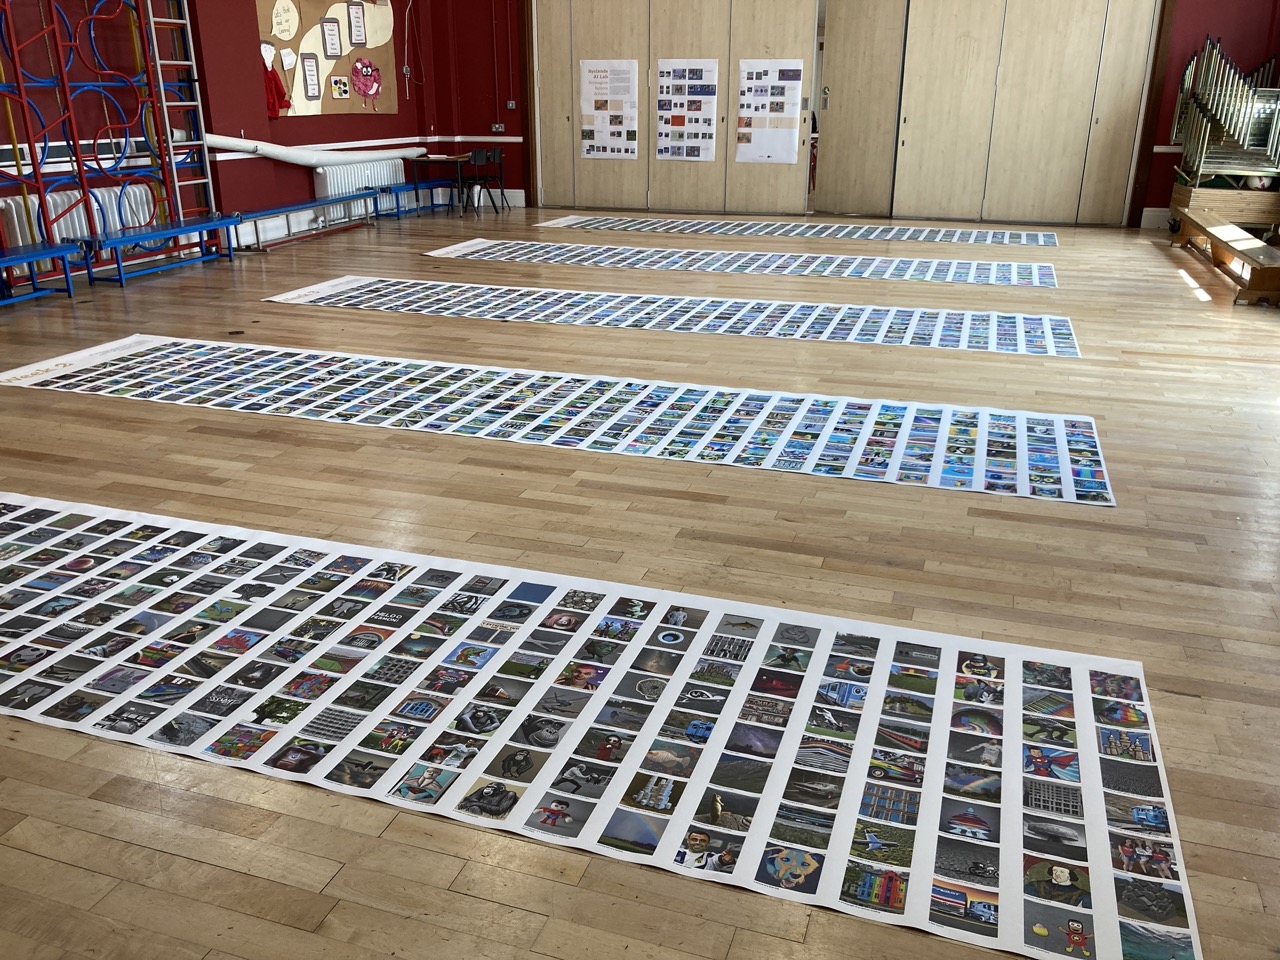 Overview of the exhibition setup. The long prints on the floor show the students' weekly progress and outputs.